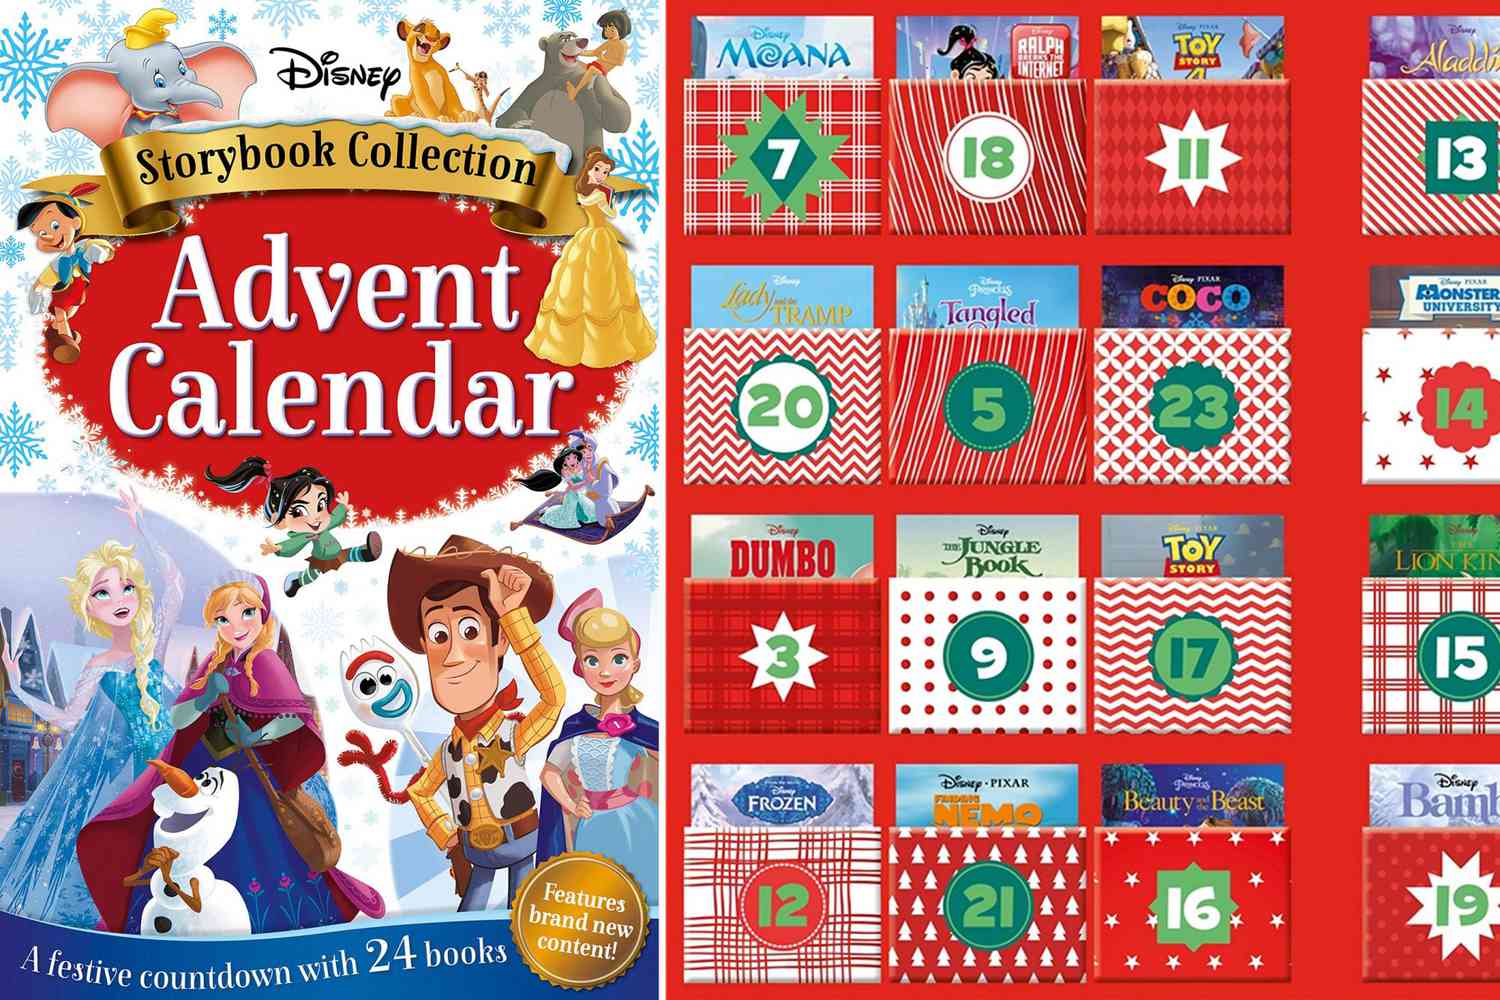 disney-storybook-collection-advent-calendar-launches-on-amazon-people